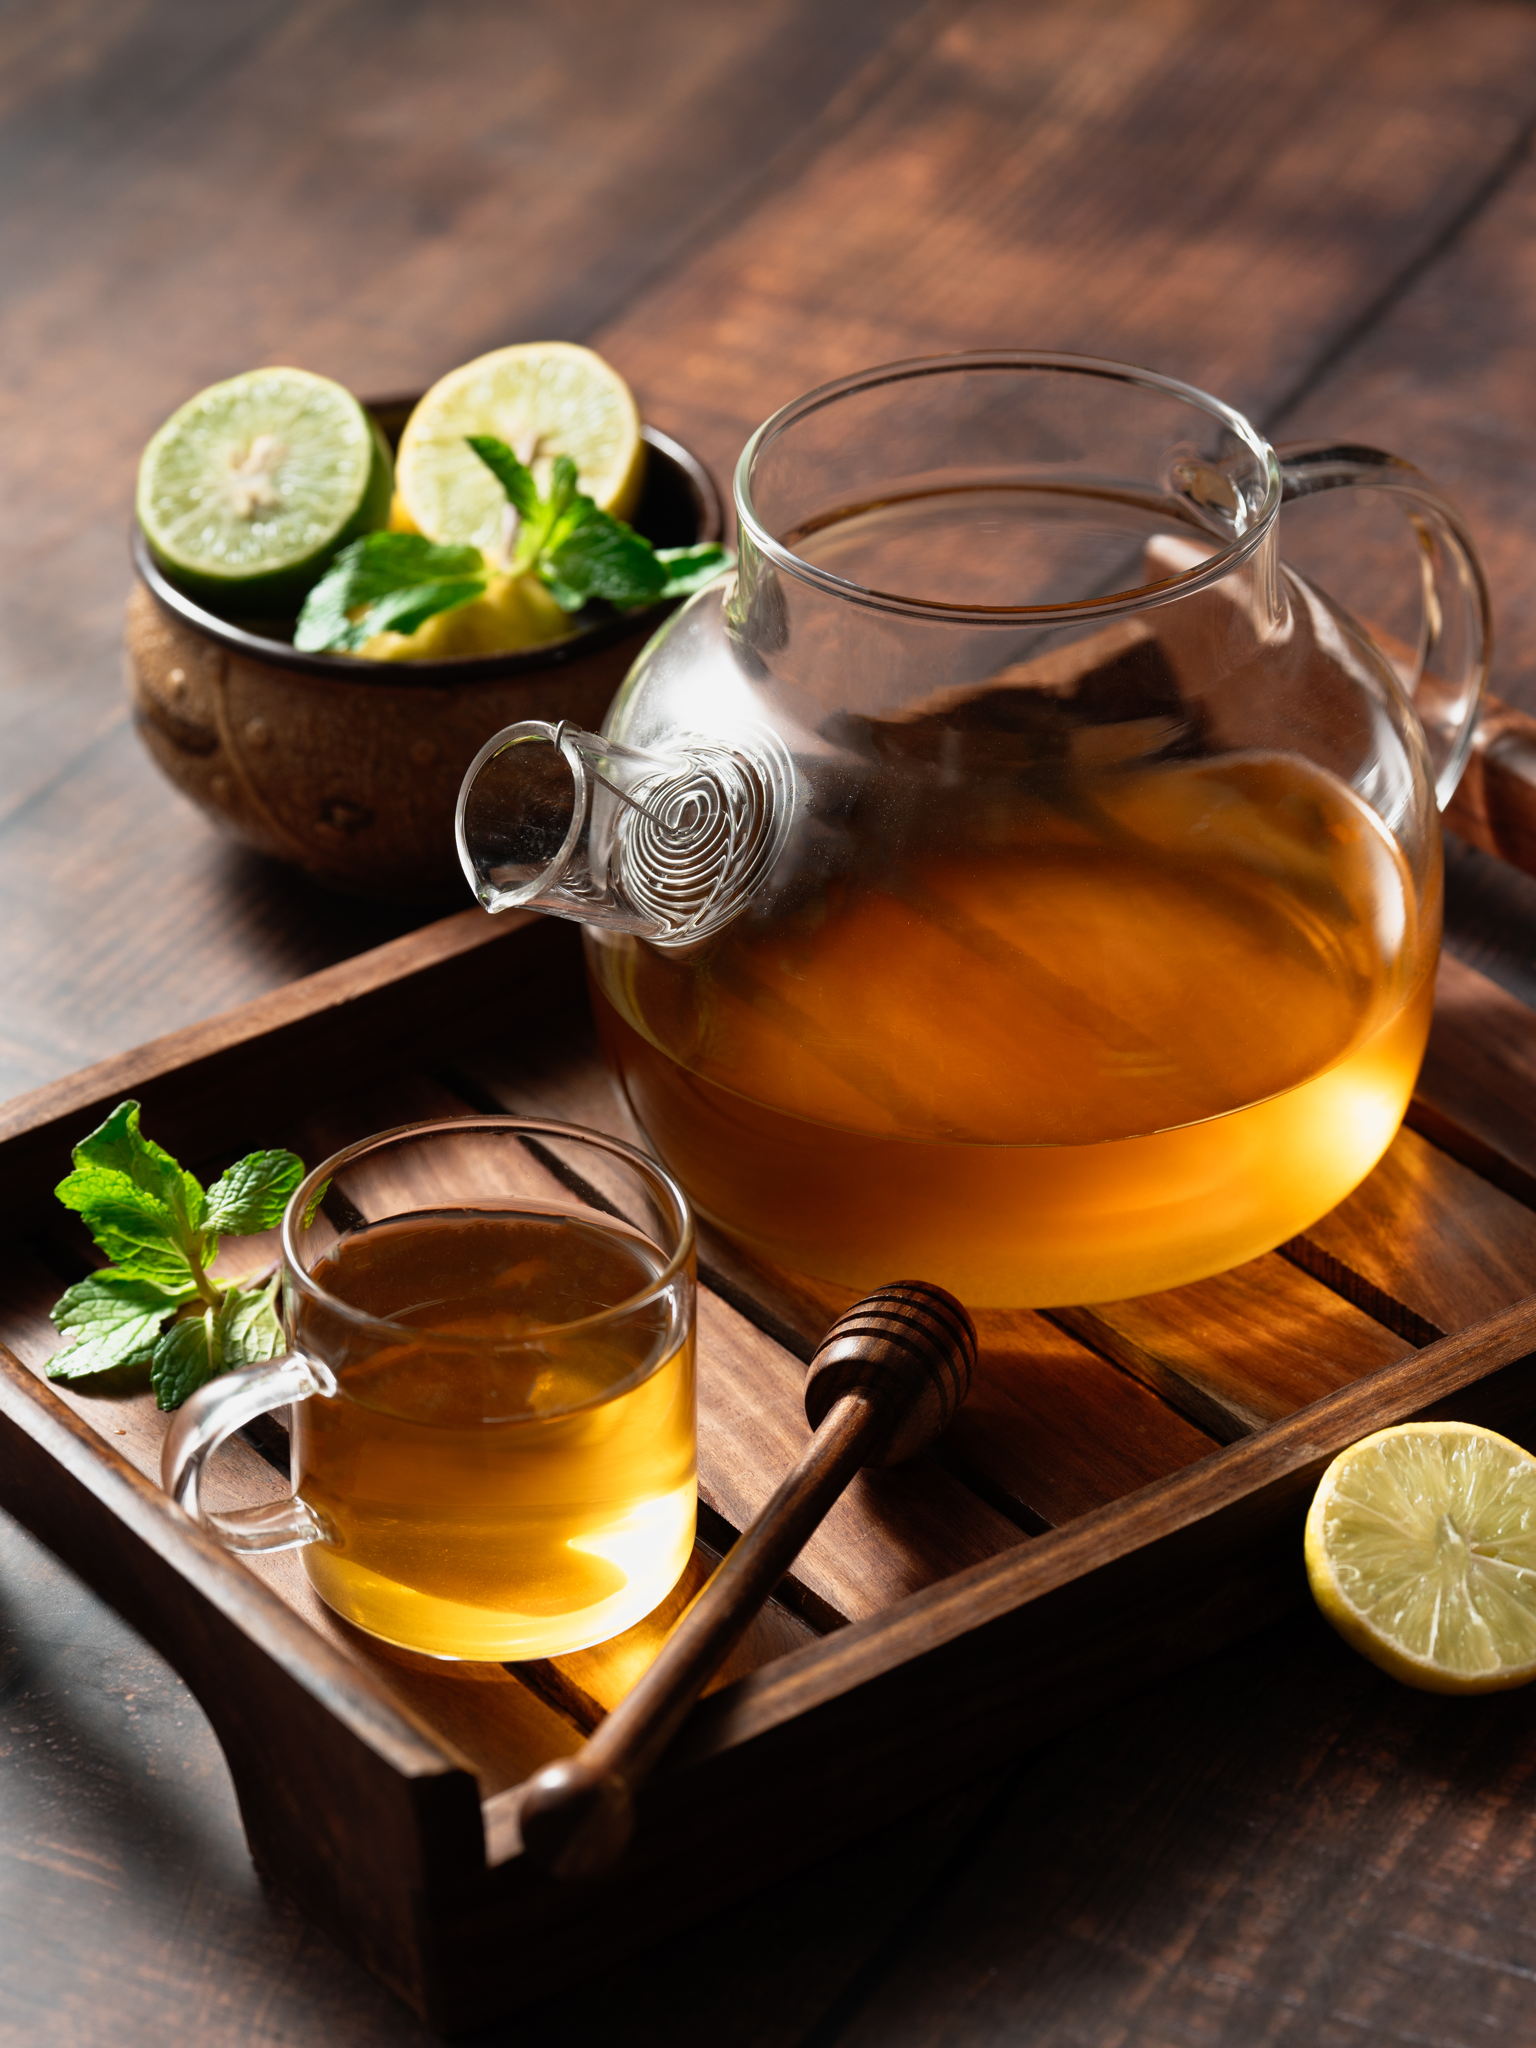 Herbal tea in a glass teapot and cup with lemon slices, mint leaves, and honey dipper on a wooden tray